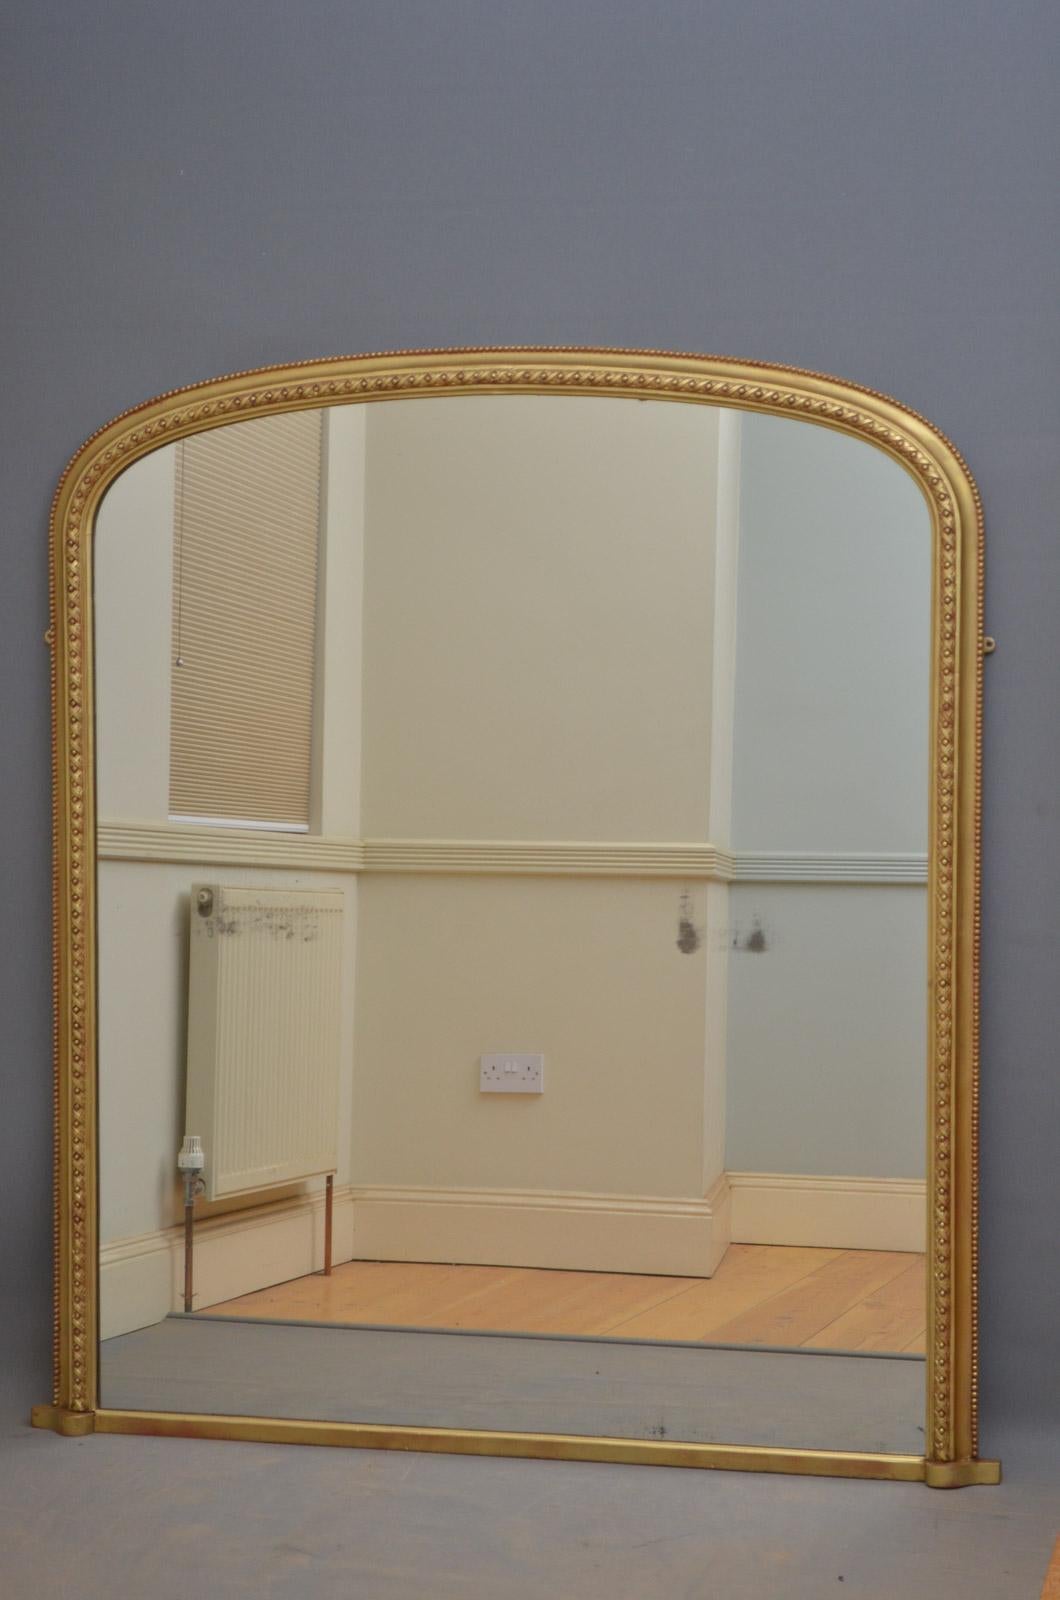 Sn4376 English Victorian overmantle or wall giltwood mirror, having original glass plate with some silvering in finely decorated frame. This antique gilded mirror has been refinished and is ready to place at home, circa 1870.
Measures: H 62.5